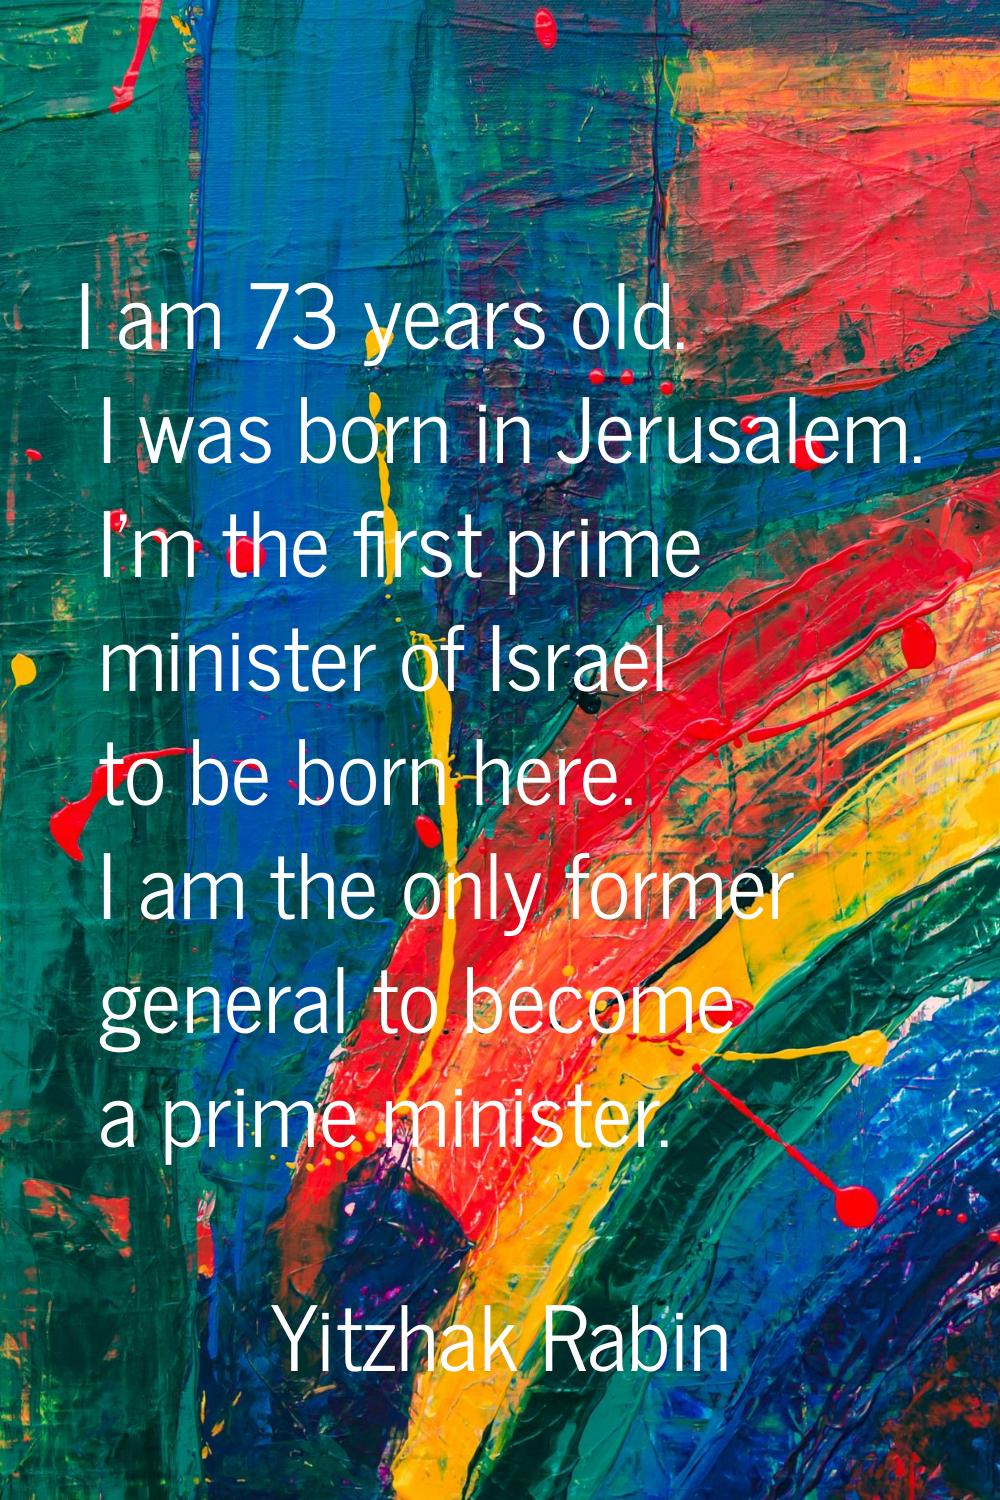 I am 73 years old. I was born in Jerusalem. I'm the first prime minister of Israel to be born here.